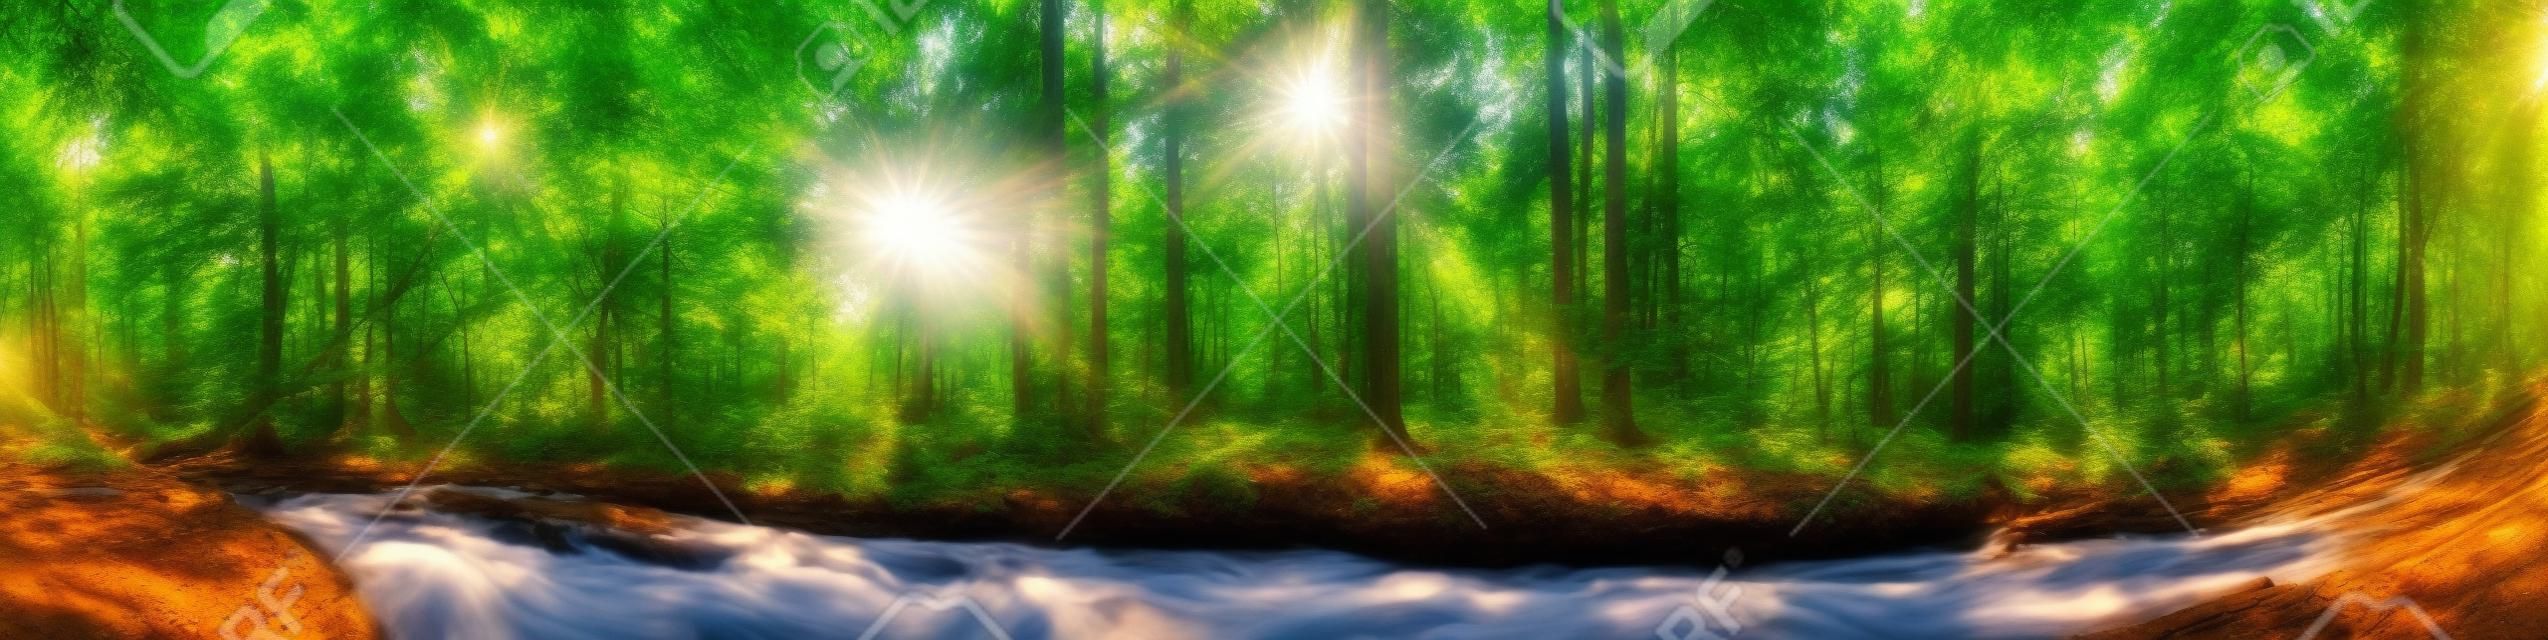 Beautiful forest panorama with trees, creek and sun